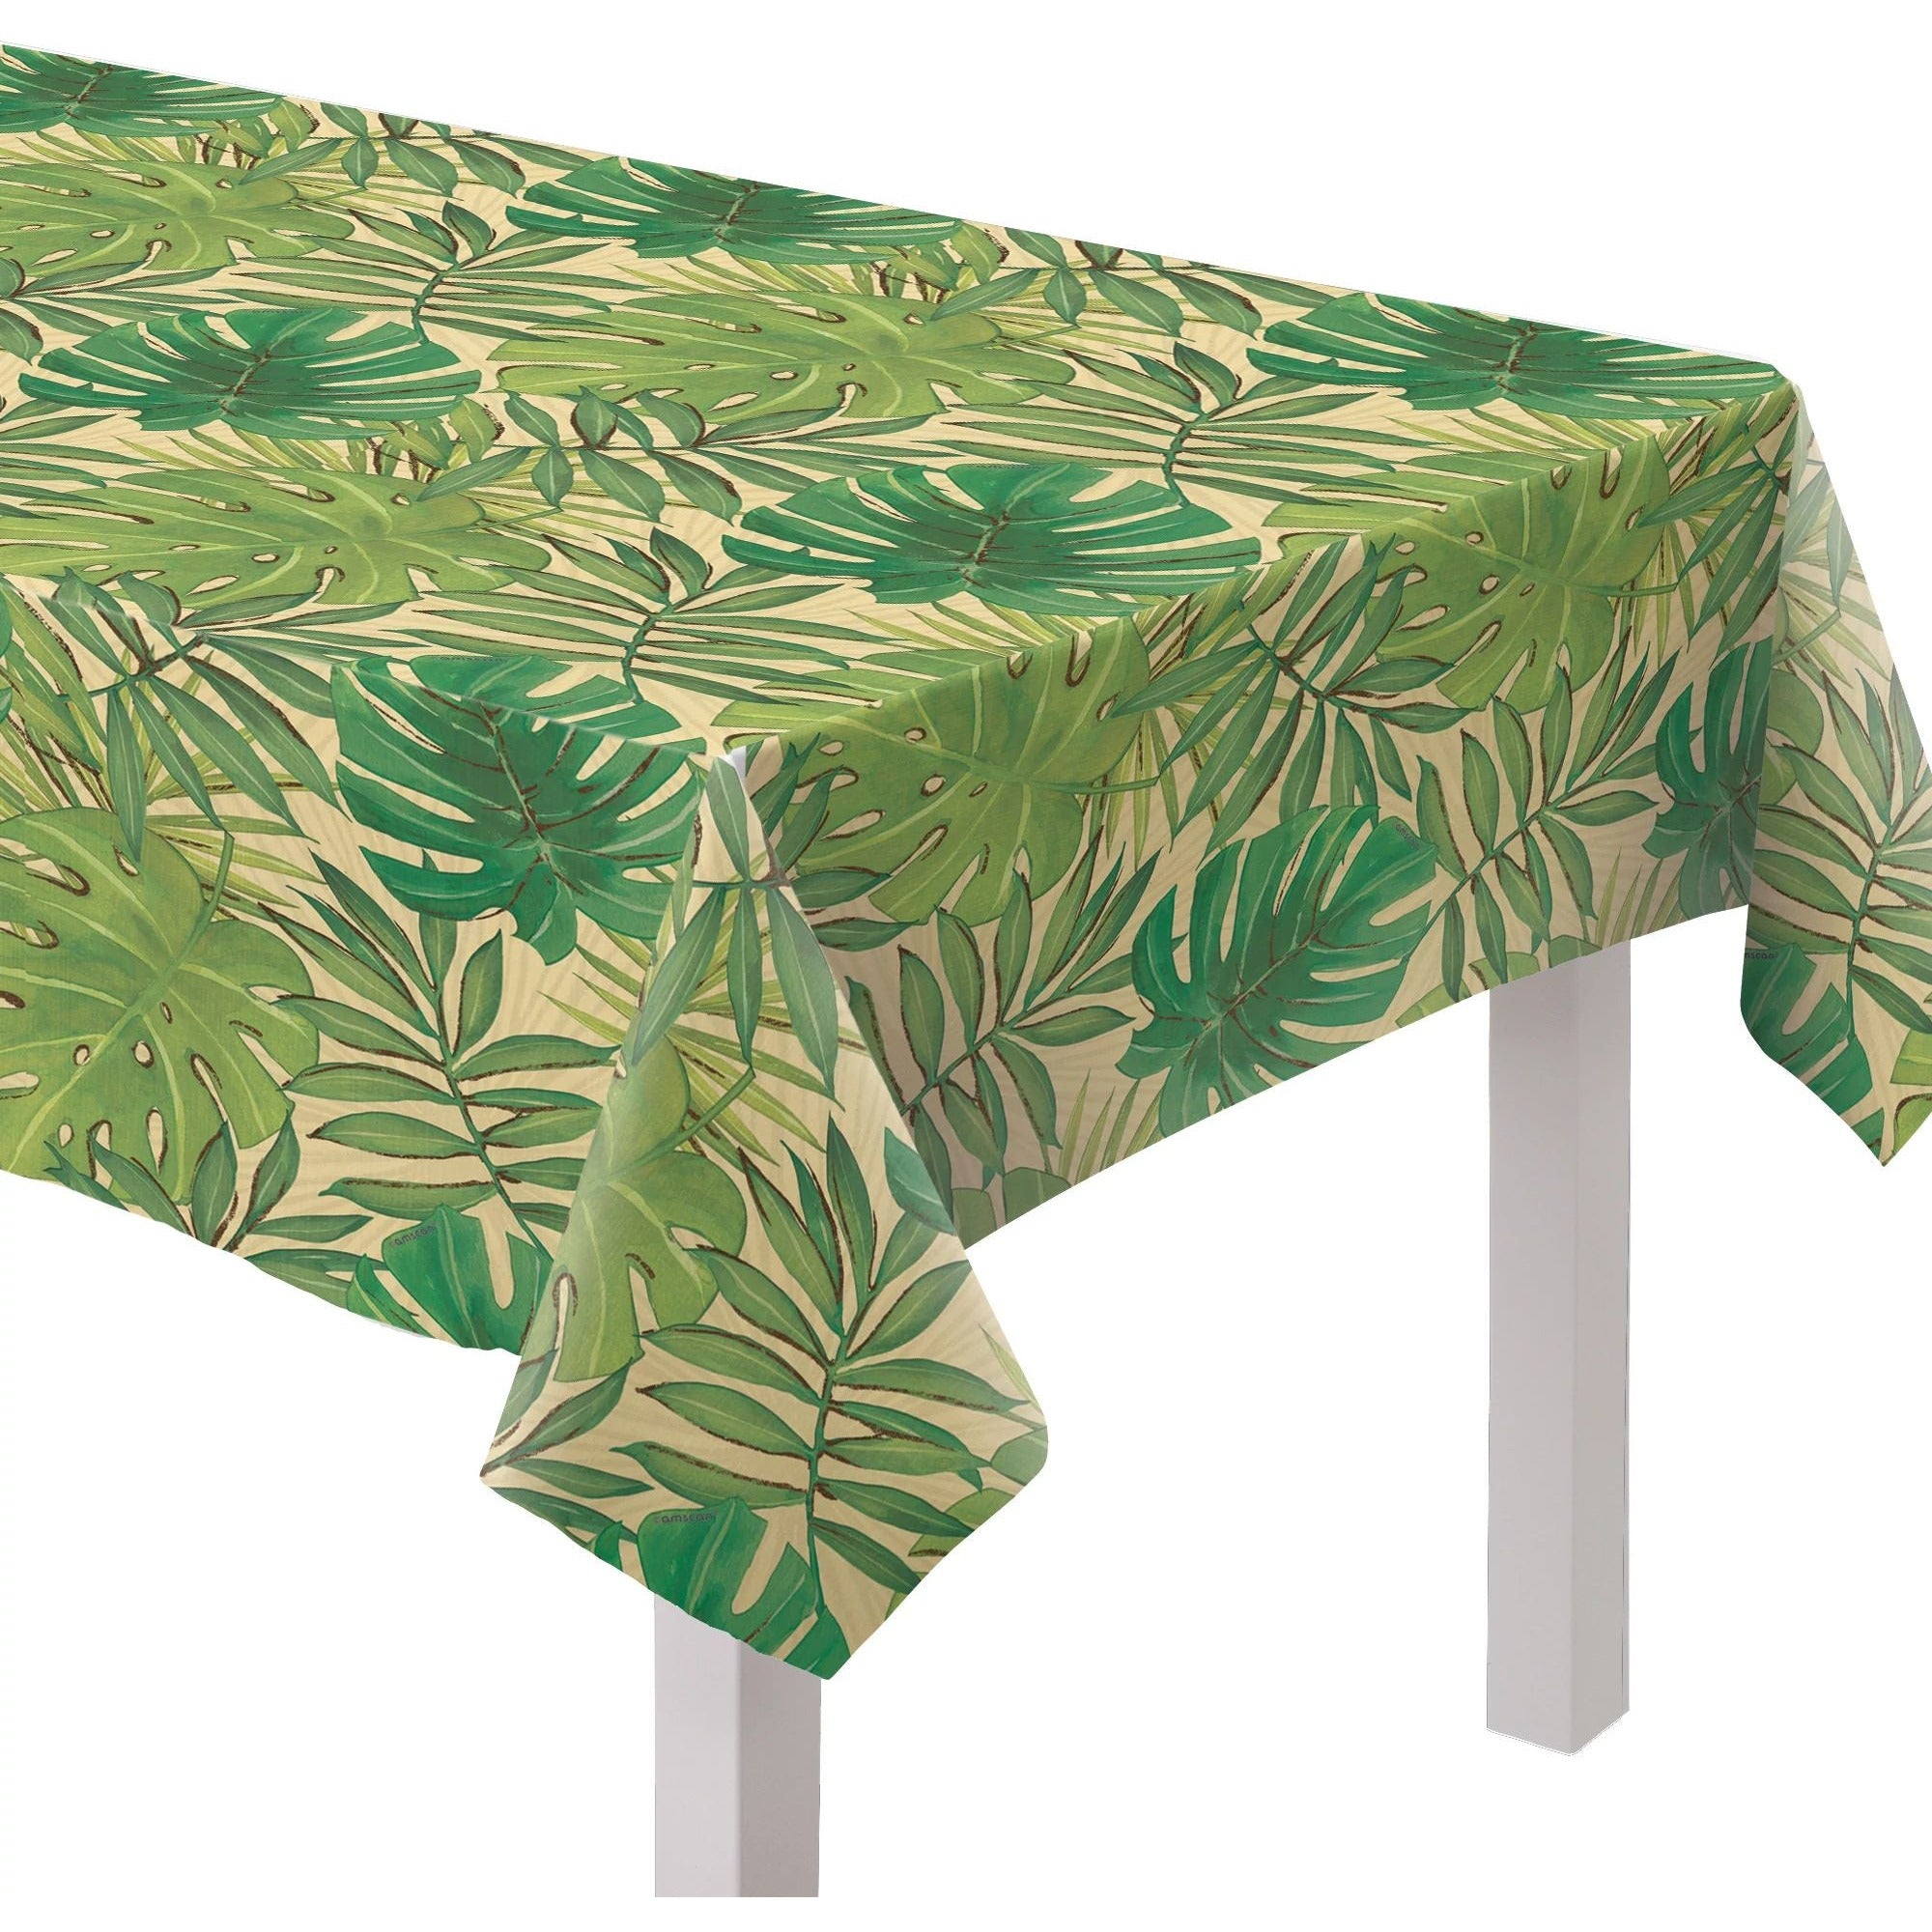 Amscan LUAU Island Palms Oblong Flannel-Backed Vinyl Table Cover